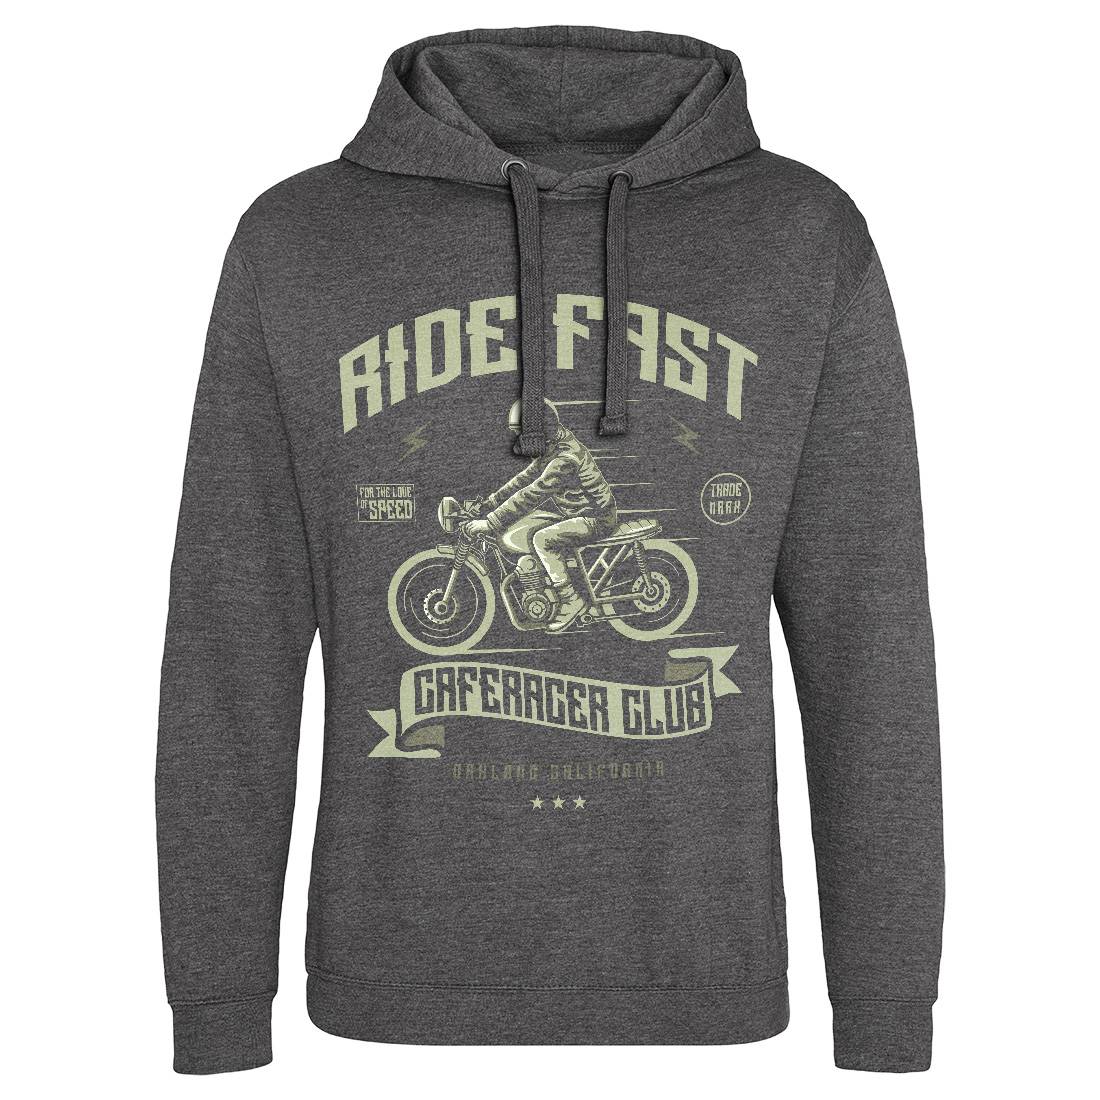 Ride Fast Mens Hoodie Without Pocket Motorcycles A117